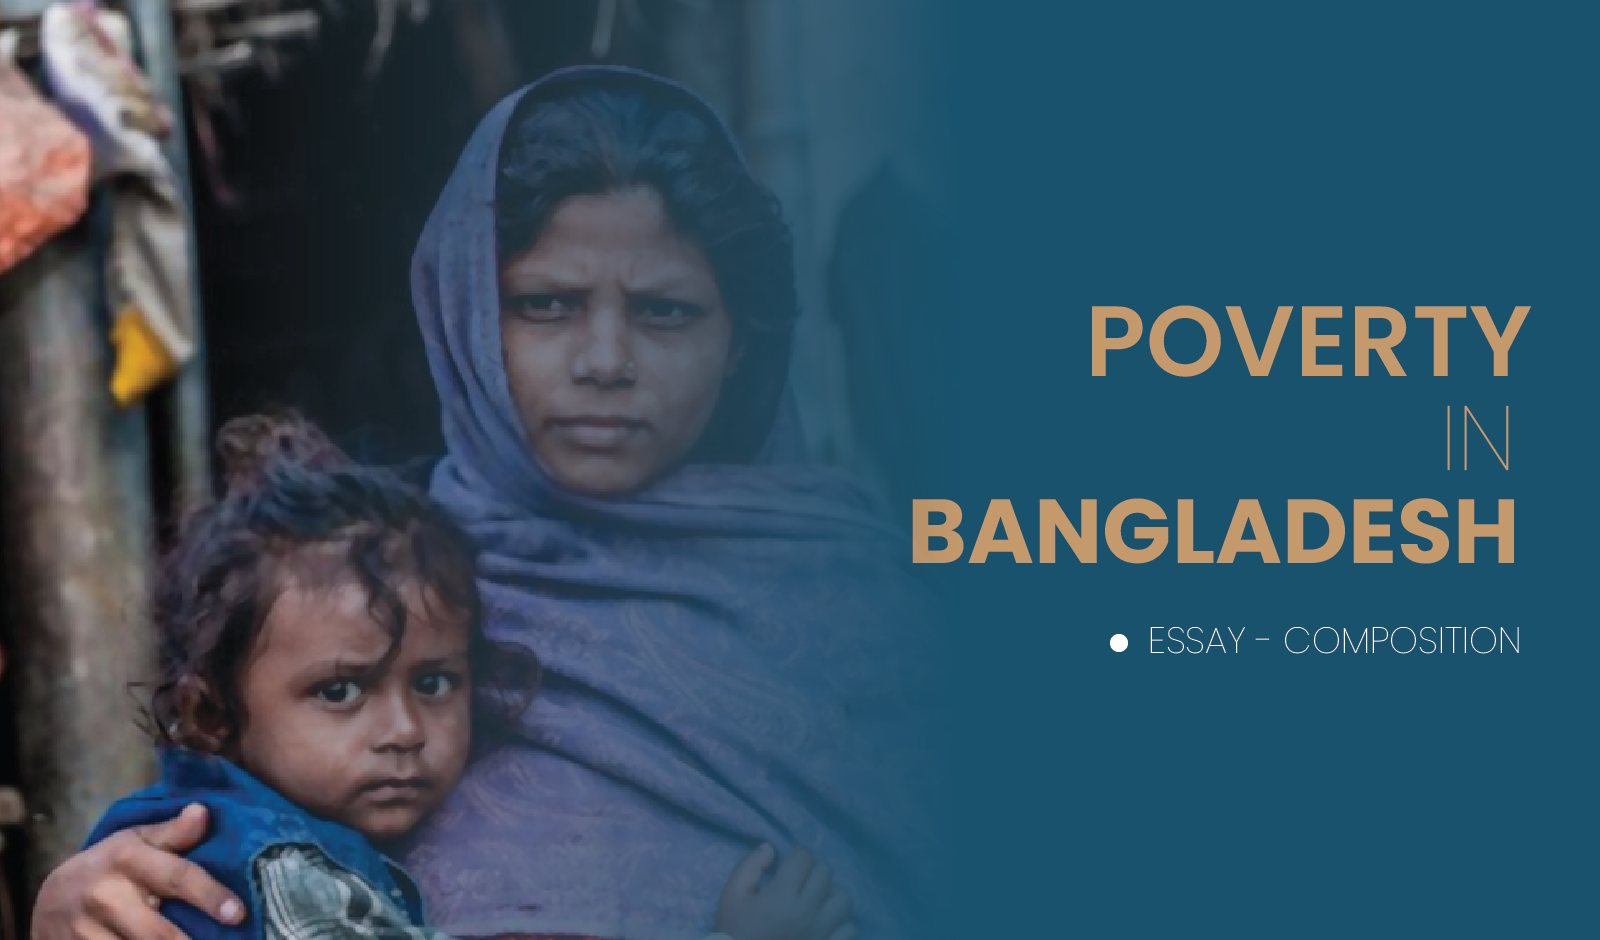 Essay on "Poverty in Bangladesh" [PDF Download]